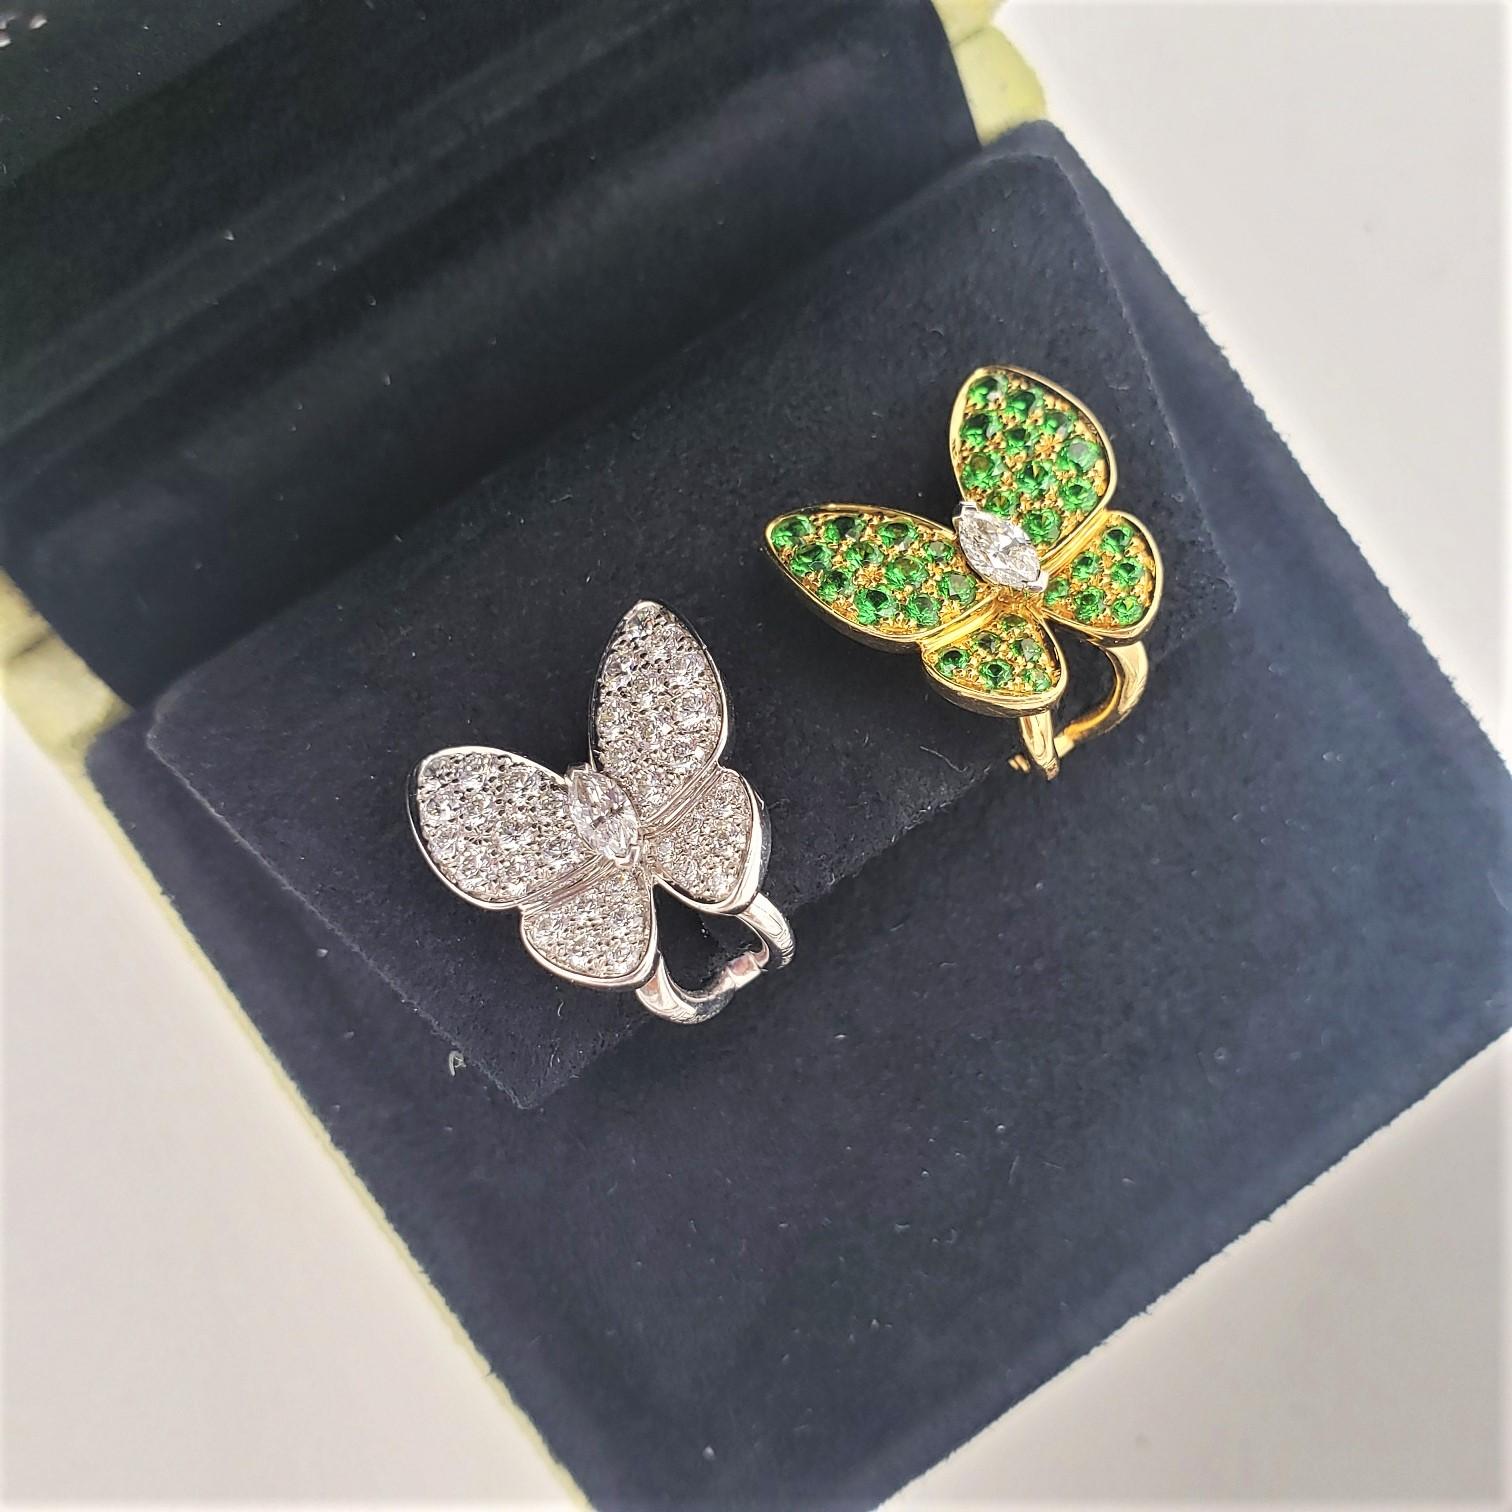 Authentic Van Cleef & Arpels 'Two Butterfly' earrings crafted in 18 karat yellow and white gold combine color and asymmetry in a dazzling way. One earring is crafted in white gold and set with an estimated 1.00 carats of high-quality diamonds. The